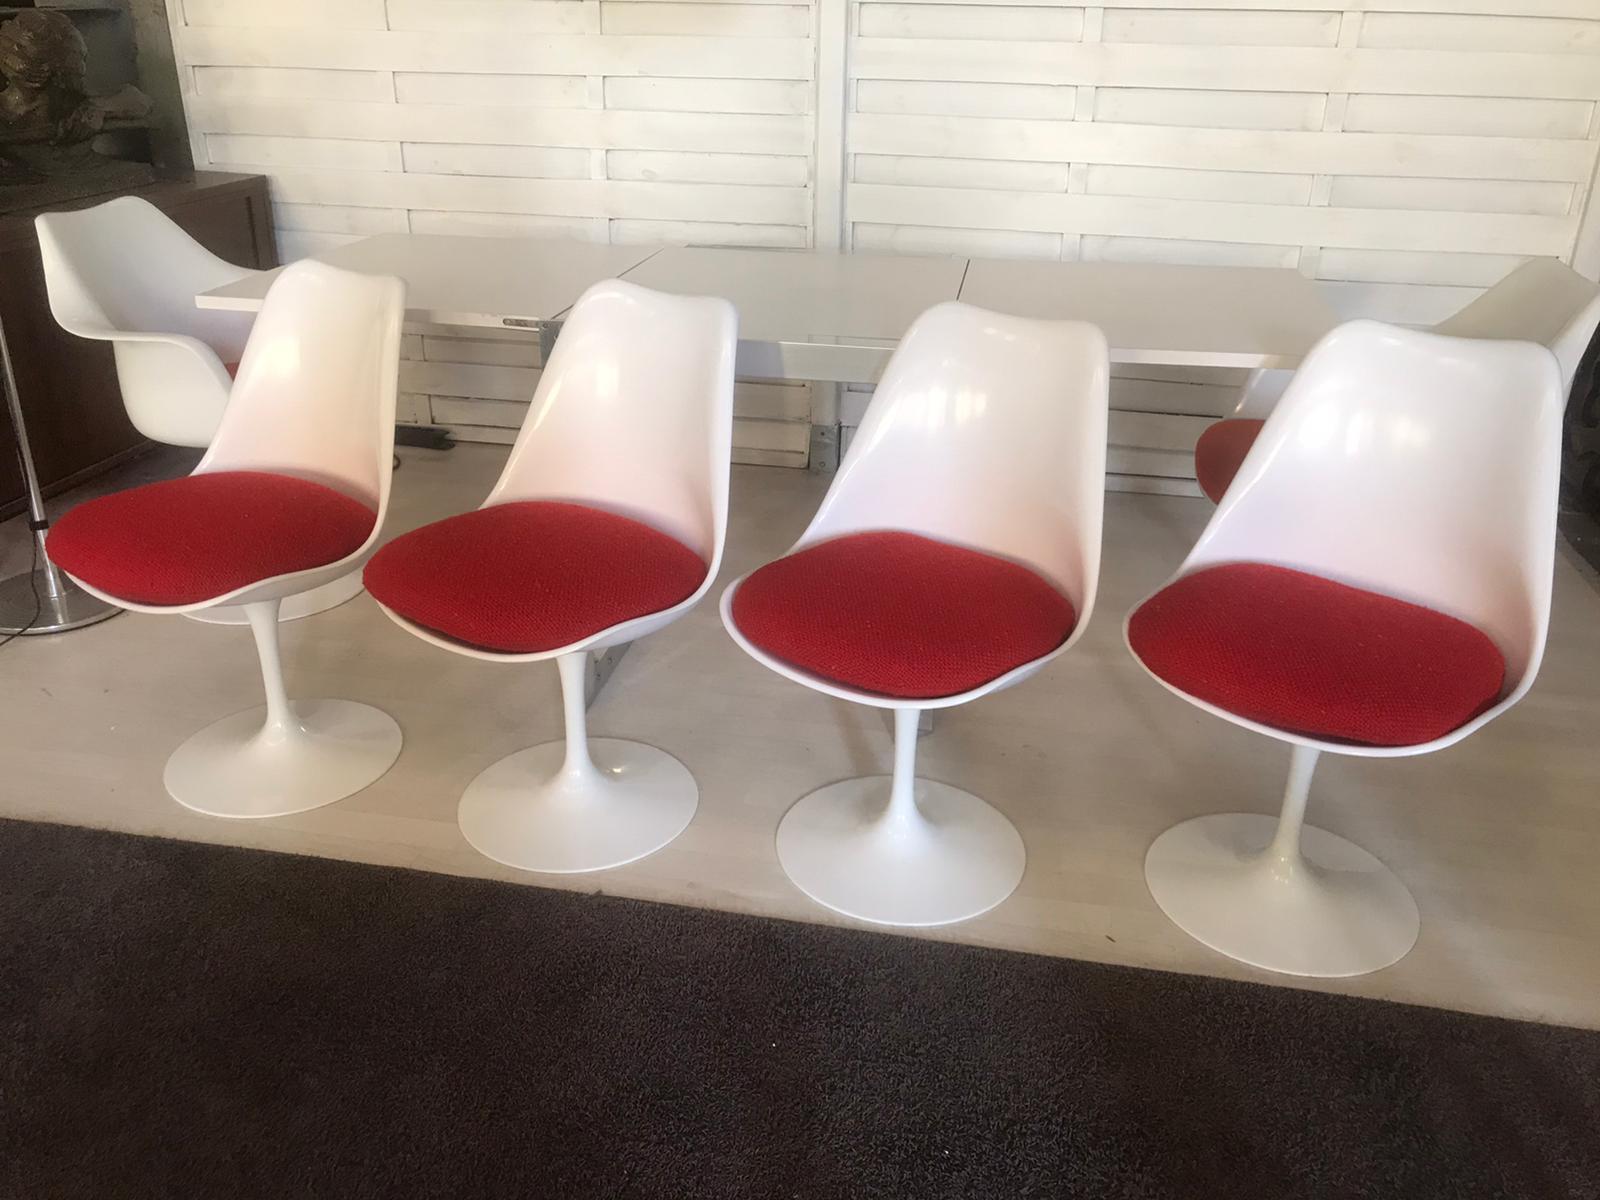 Eero Saarinen (1910-1961) & Knoll International

Suite of 4 Tulip model chairs
White lacquered fiberglass shell, swivel base in cast aluminum covered with white Rilsan 
Dimensions: 31.89 x 20.08 x 17.33 in

Suite de 4 chaises modèle